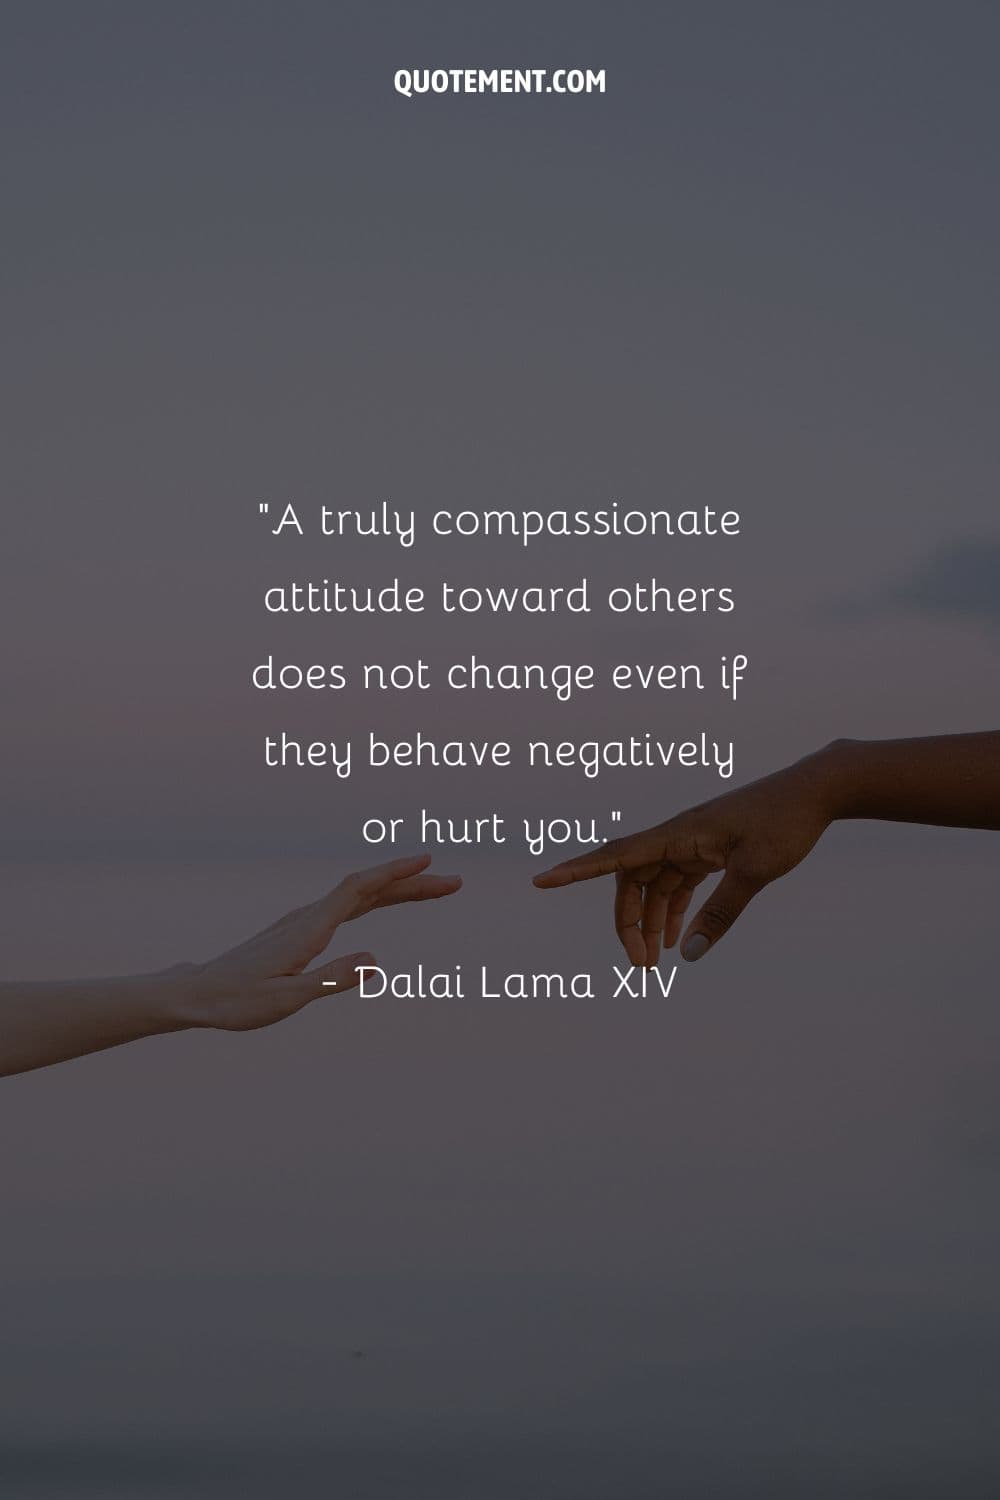 A truly compassionate attitude toward others does not change even if they behave negatively or hurt you